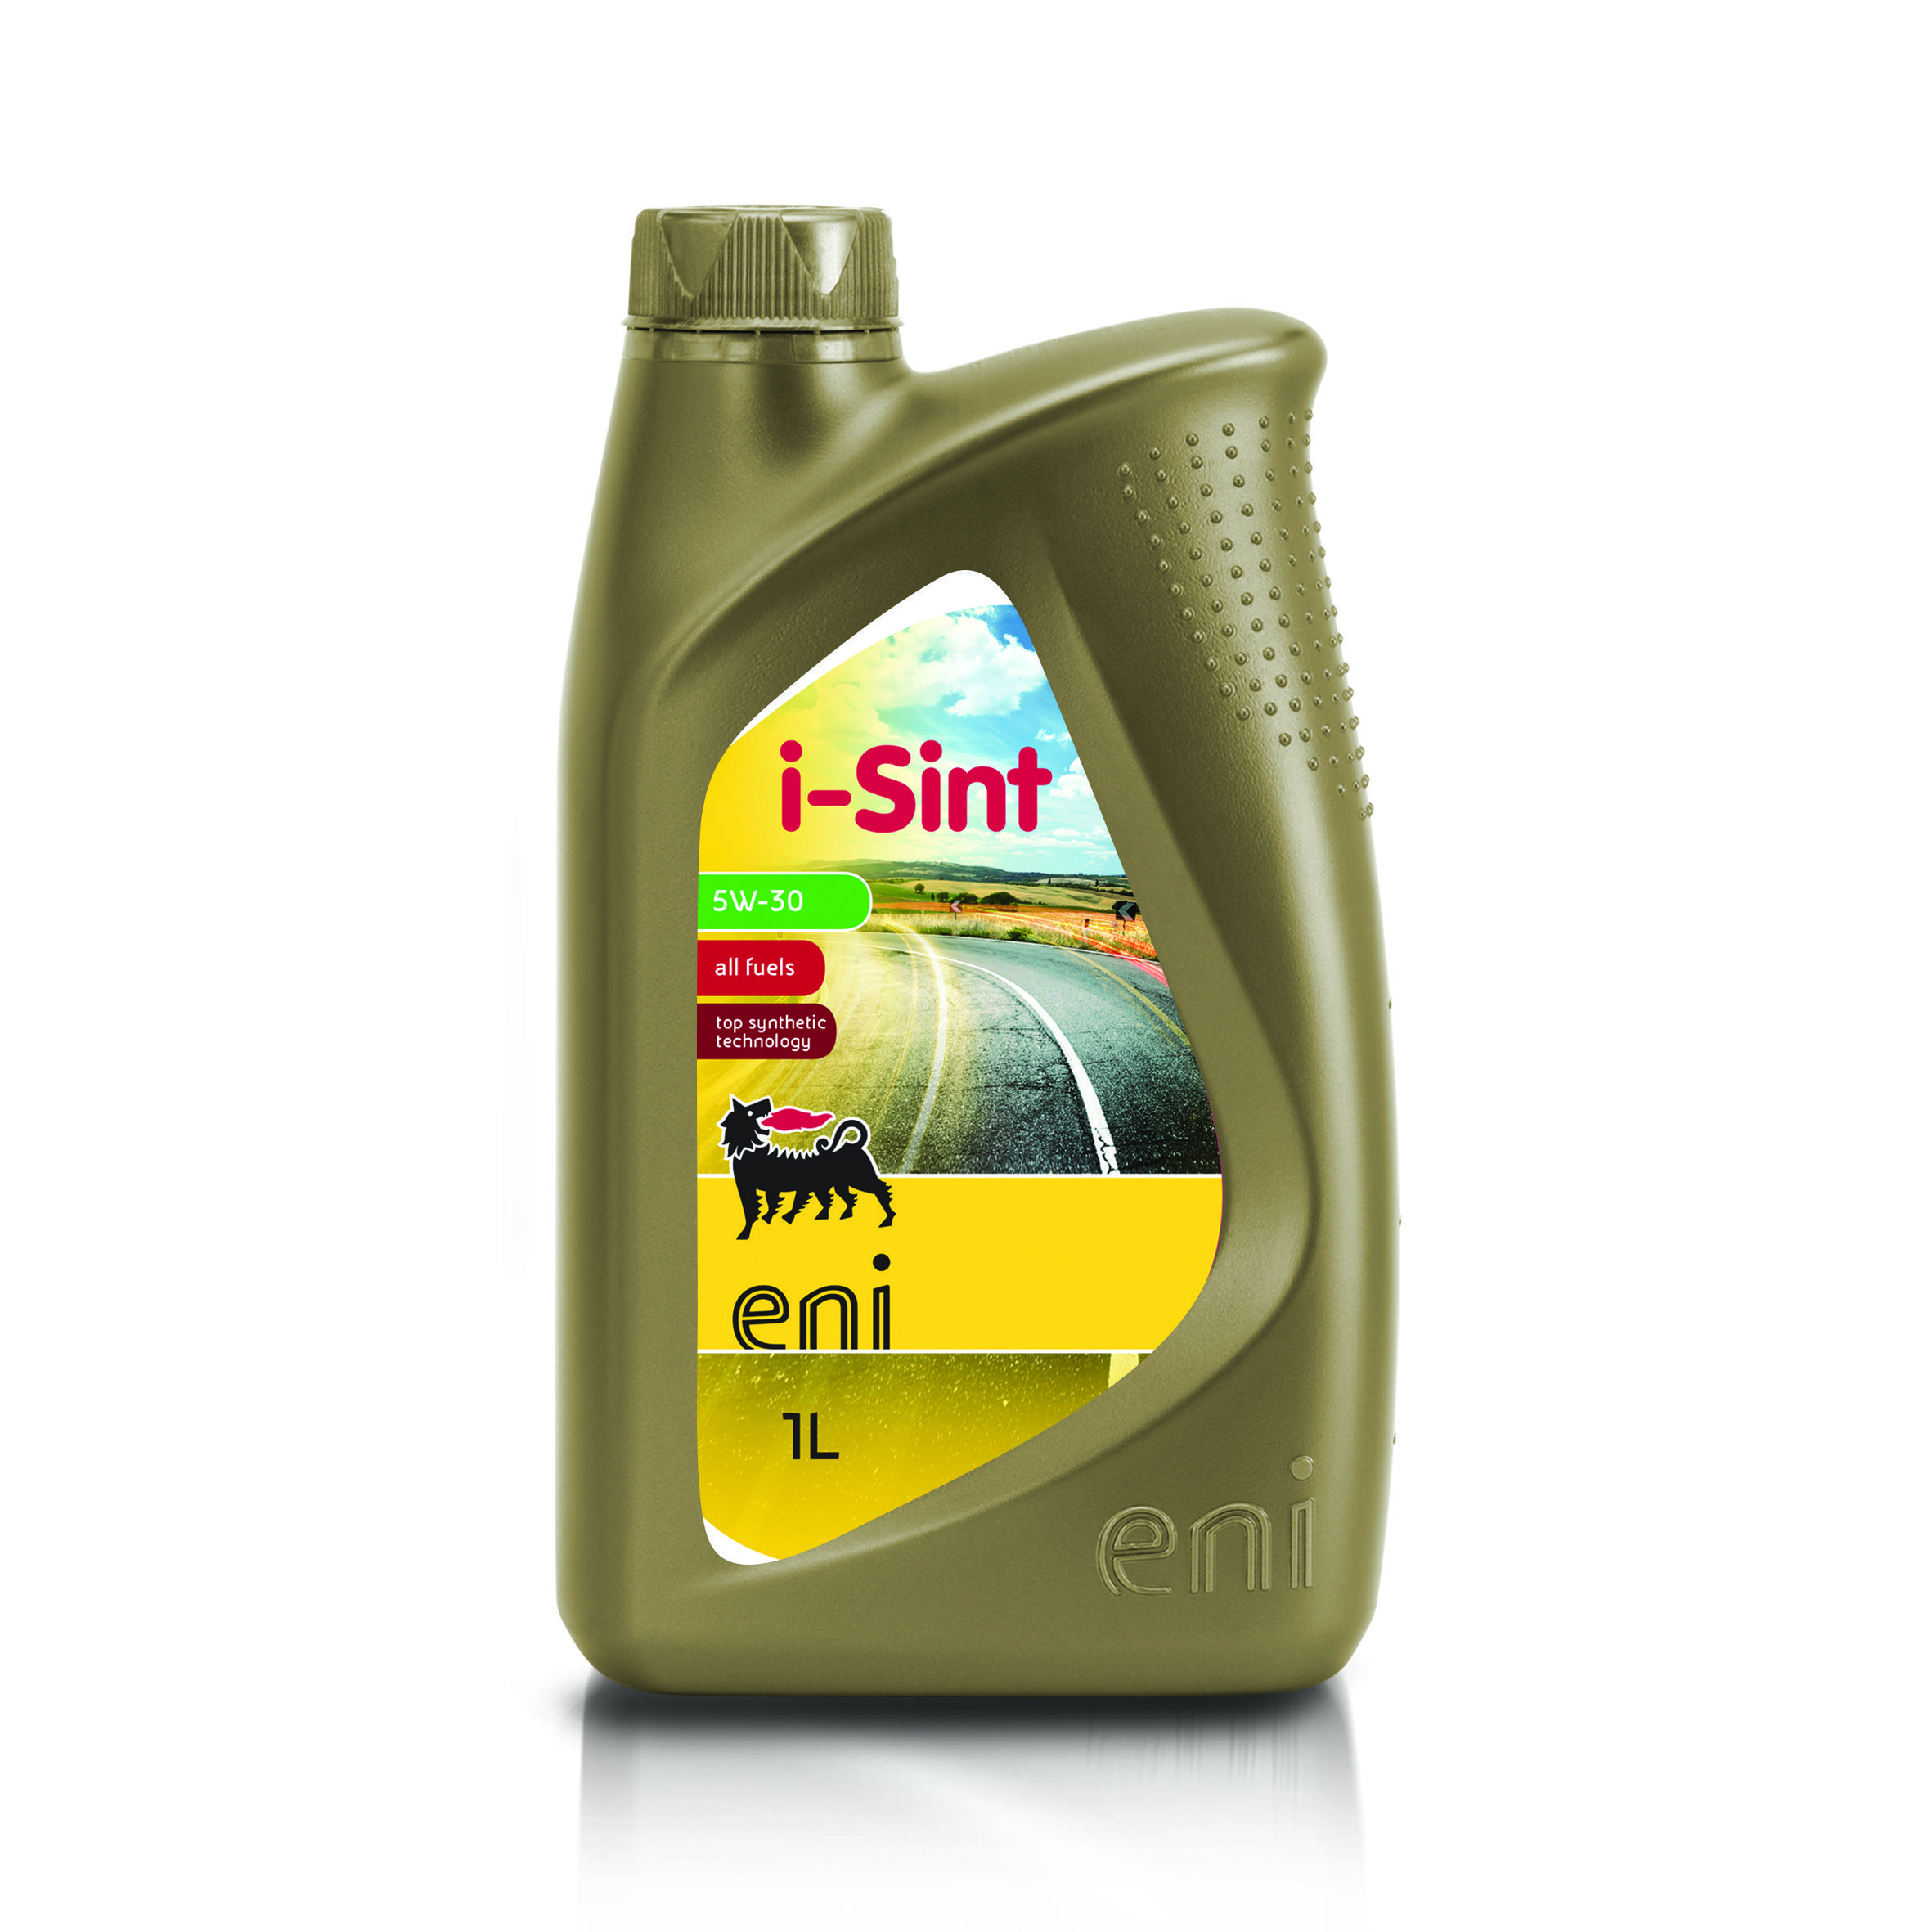 Масло eni 5w 30. Моторное масло Eni 5w-30. Моторное масло Eni i-Sint 5w30. Eni i-Sint 5w-40. Eni i-Sint 5w-30.